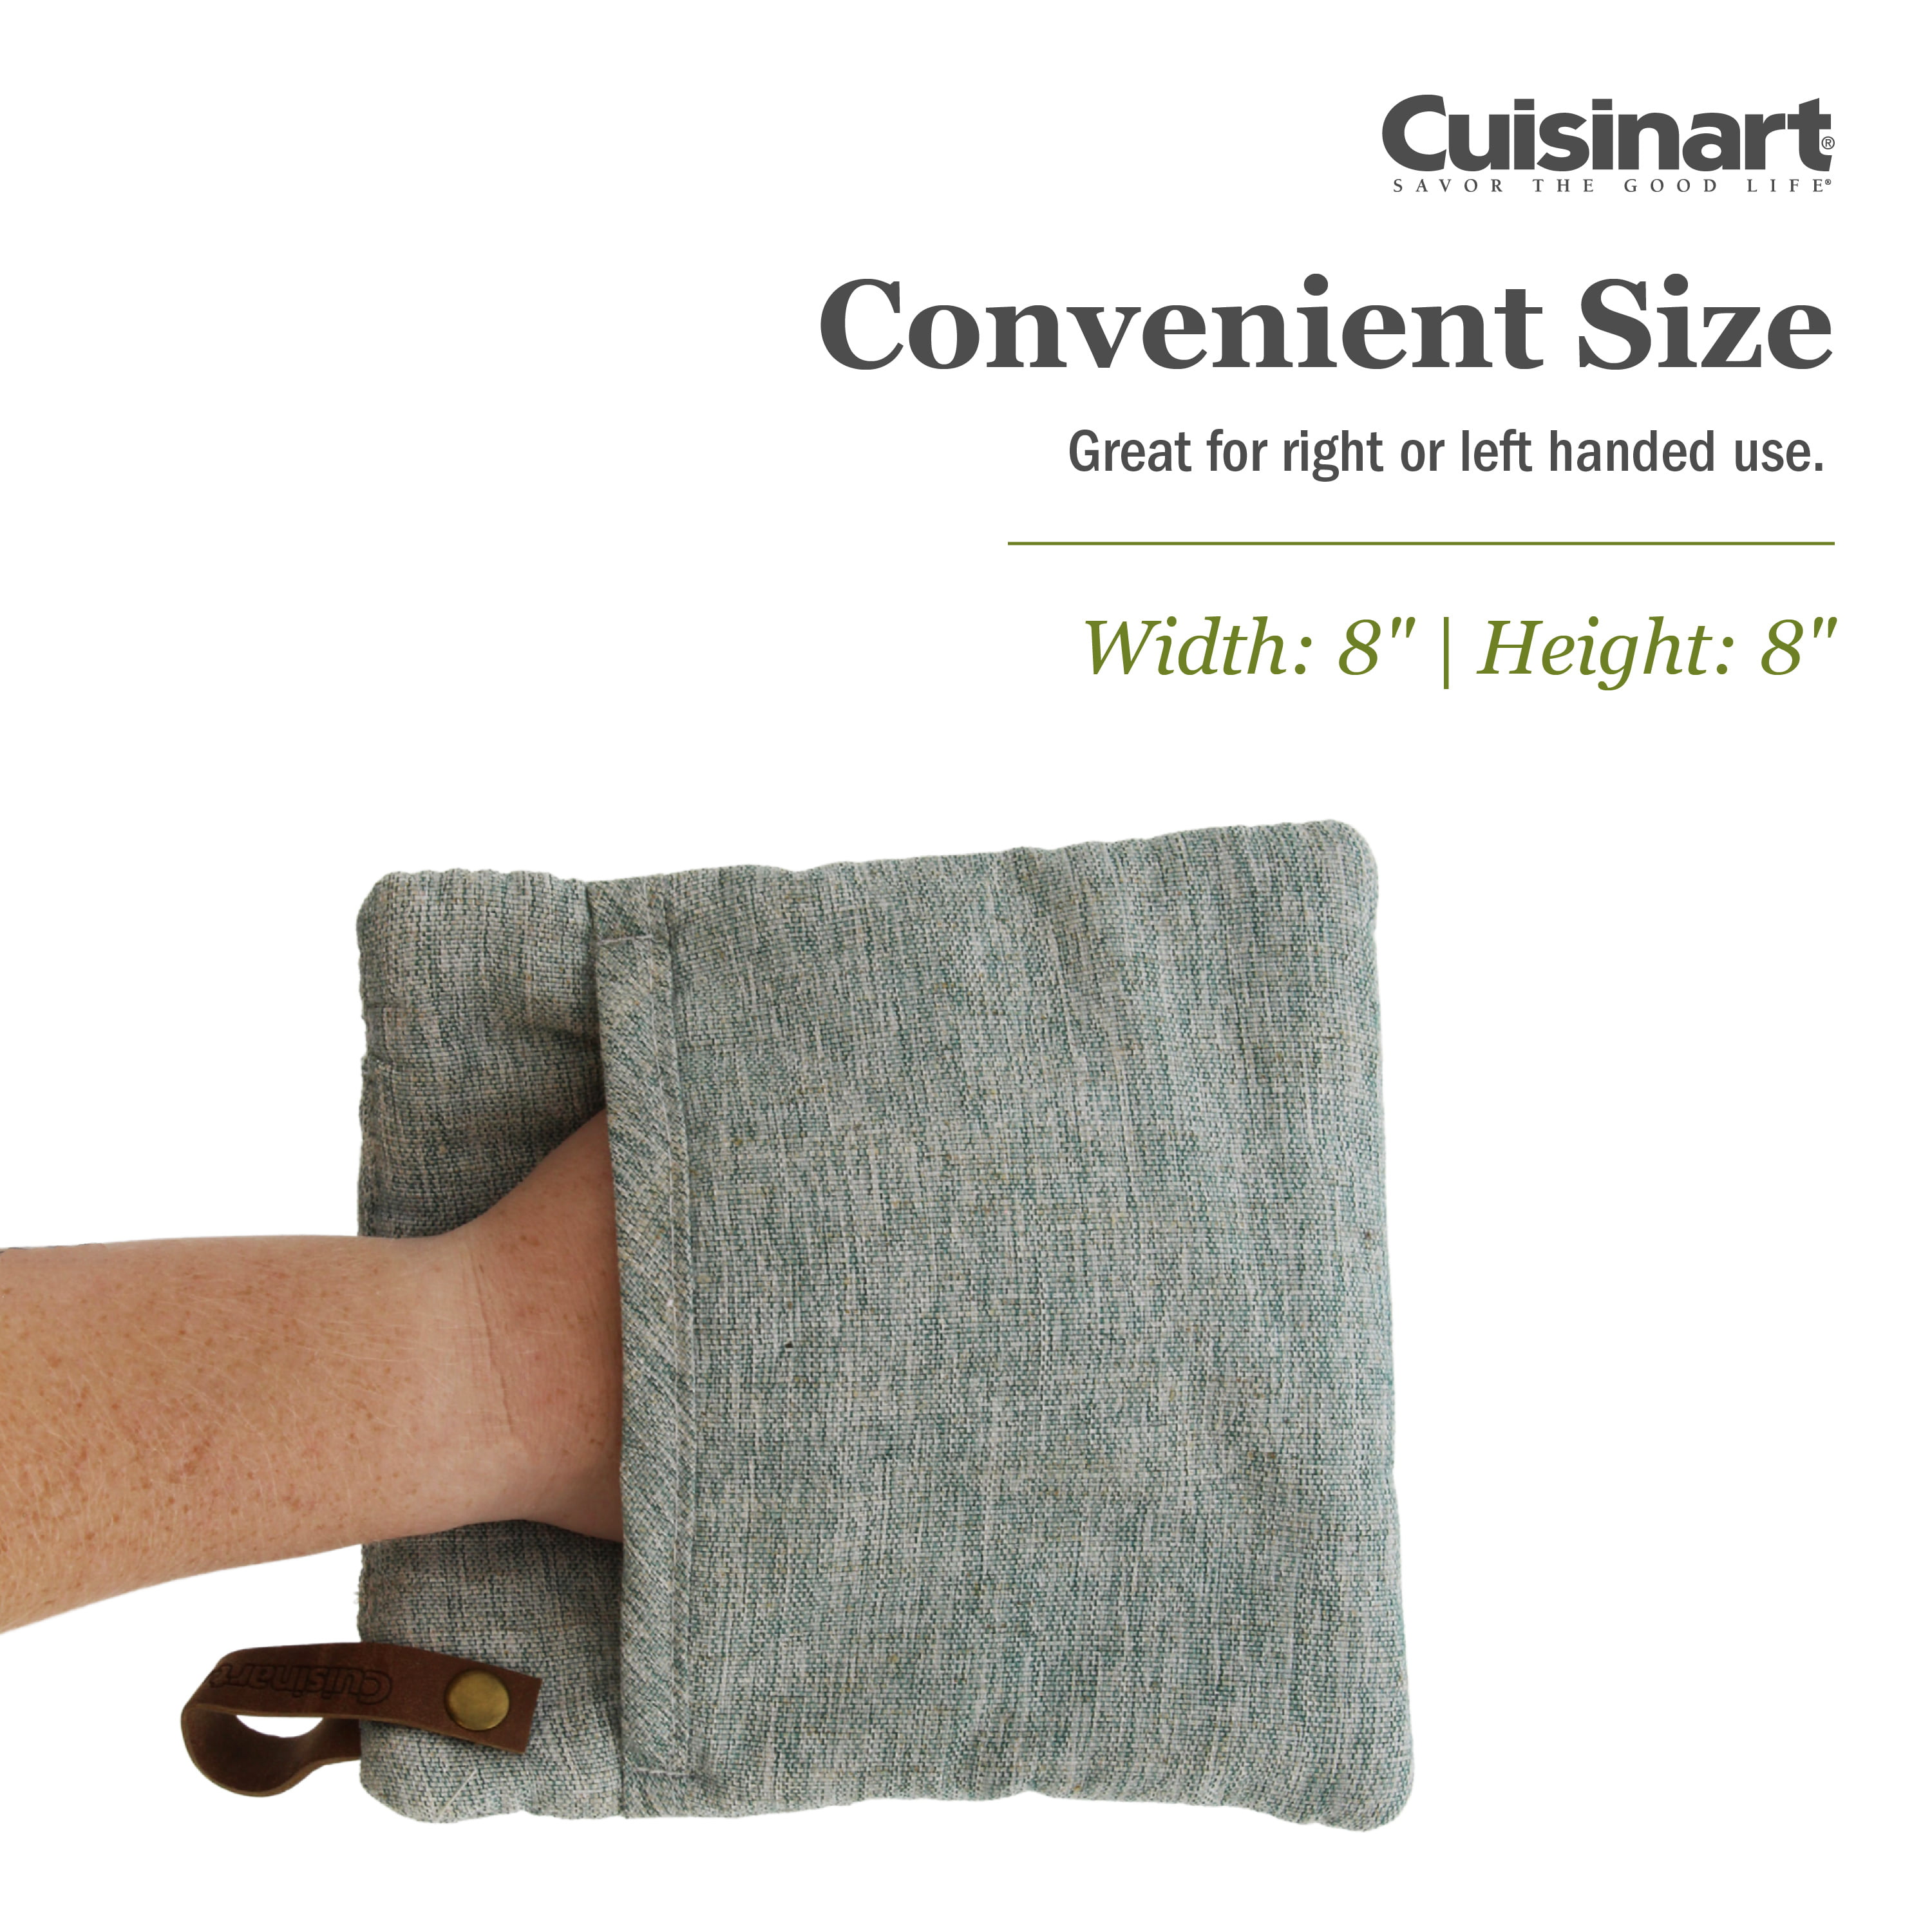 Cuisinart Chambray Oven Mitts, Set of 2 - Macy's